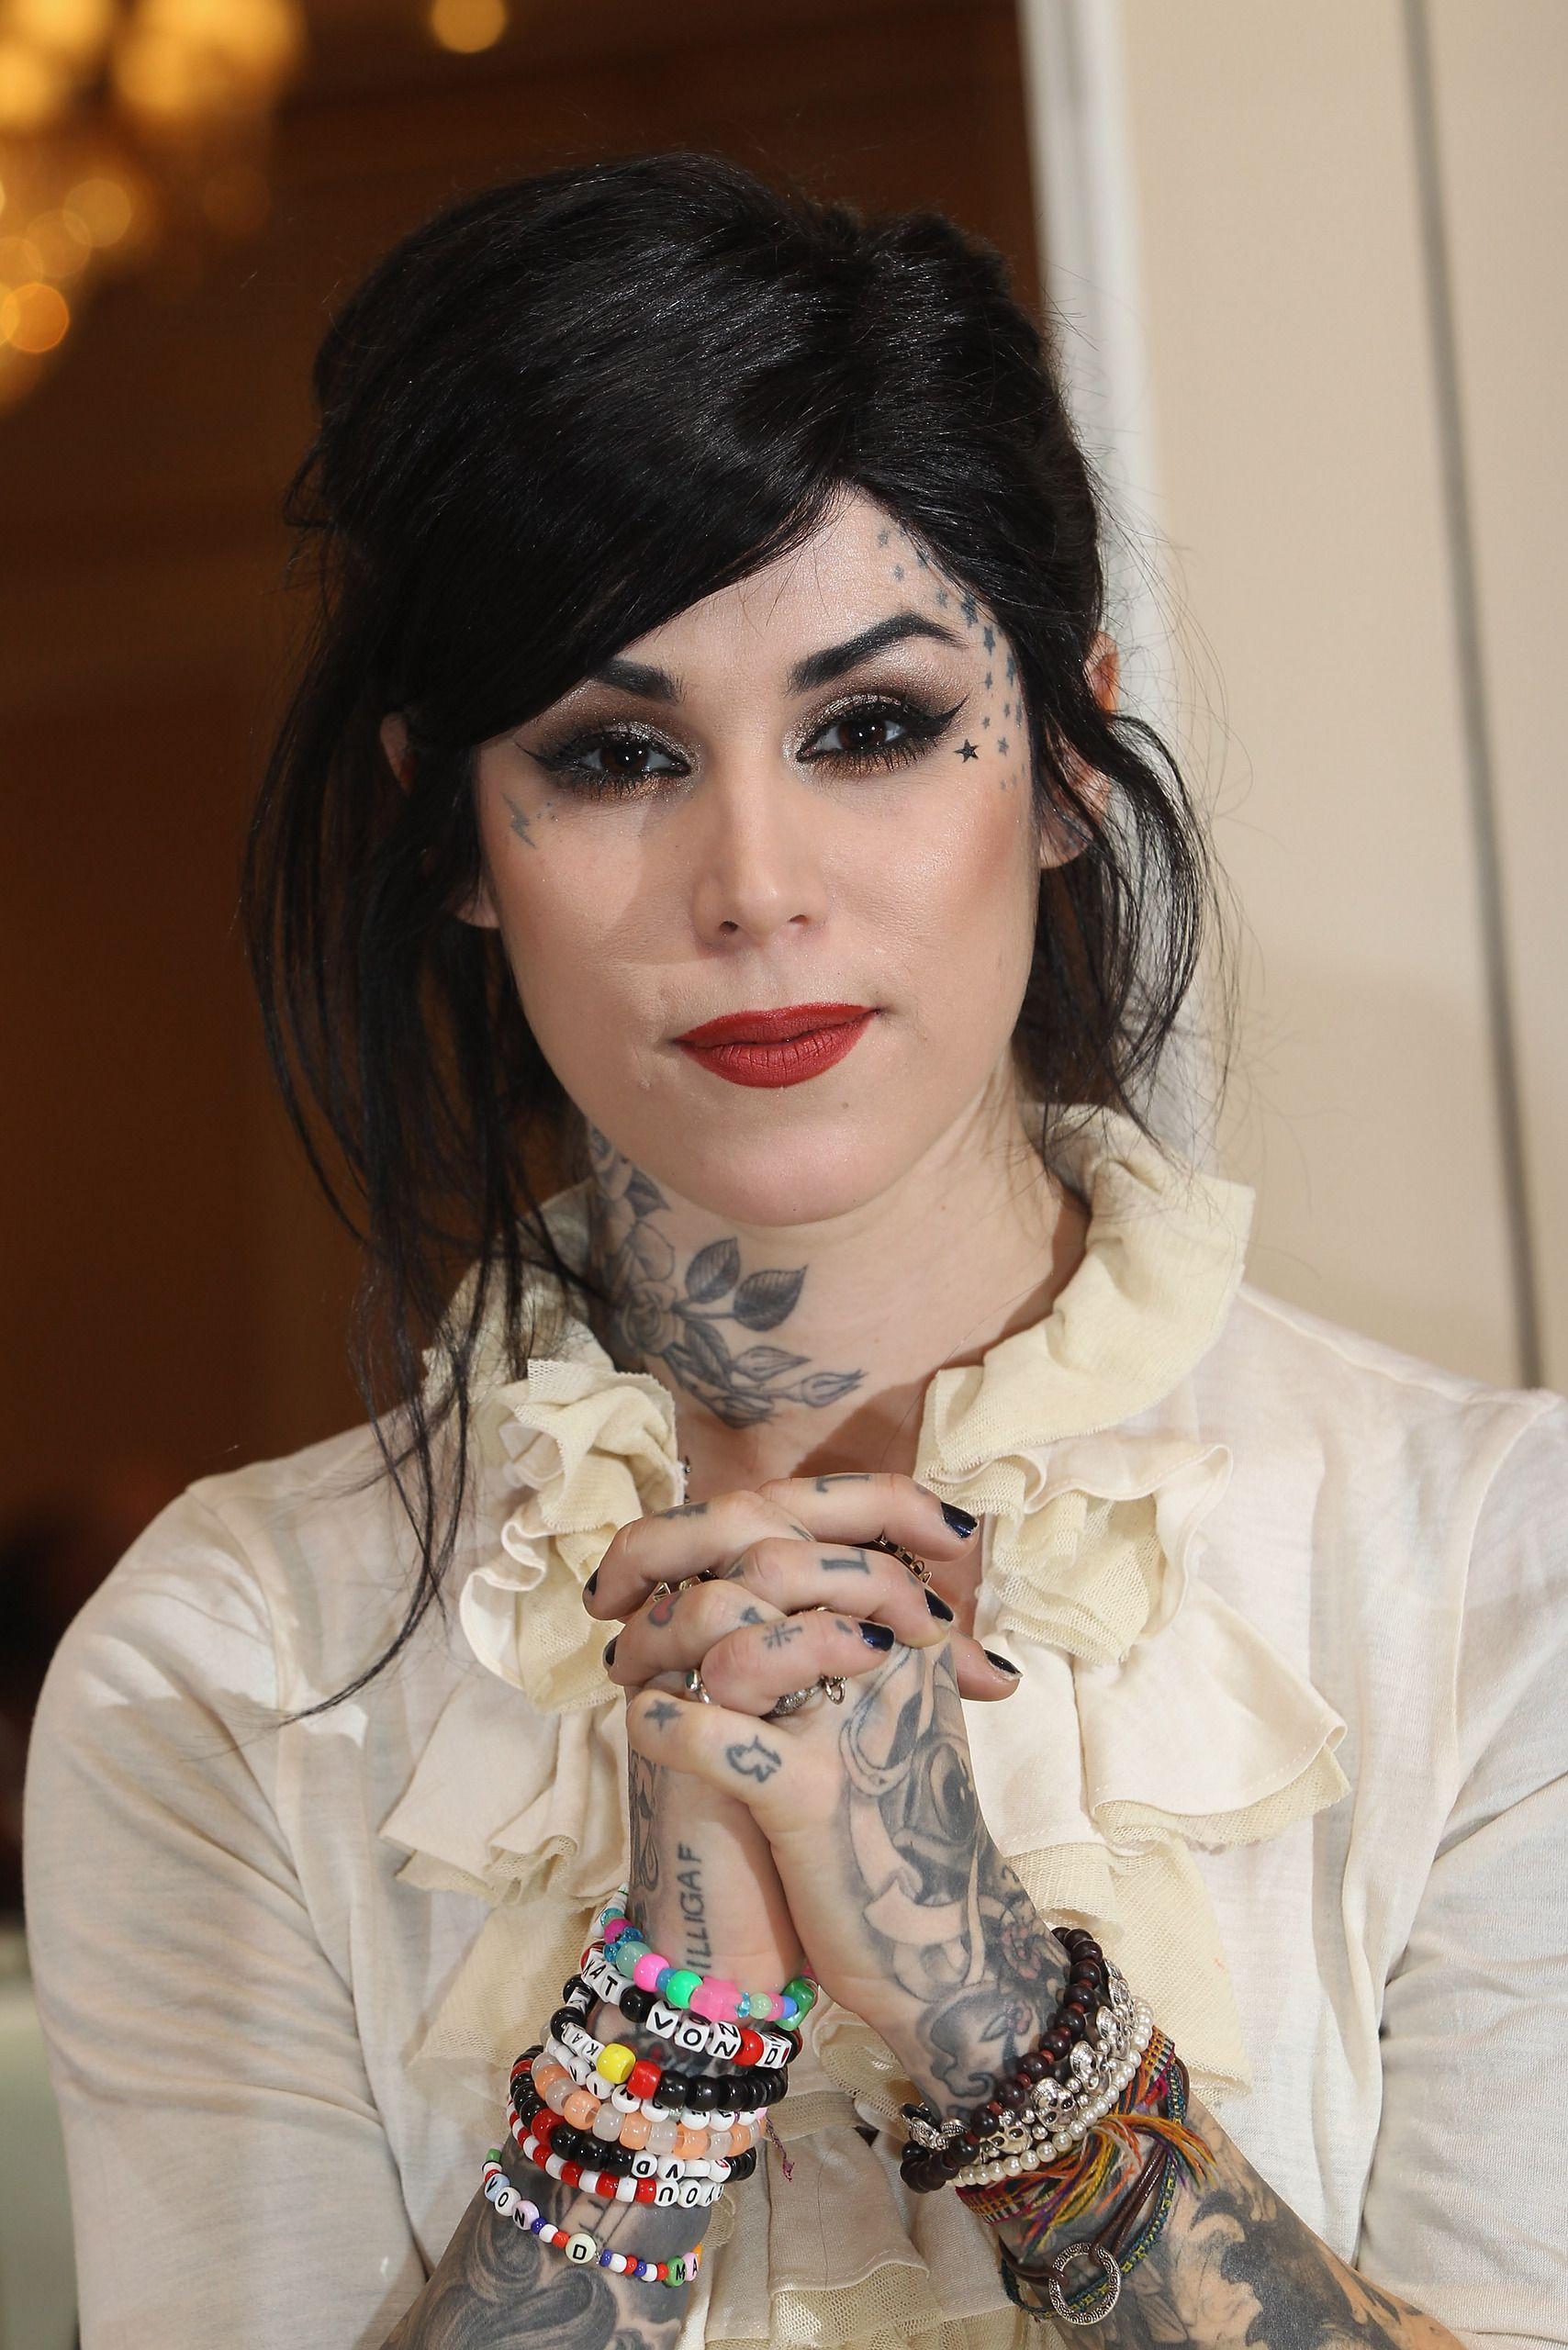 Things You Don't Know About Kat Von D